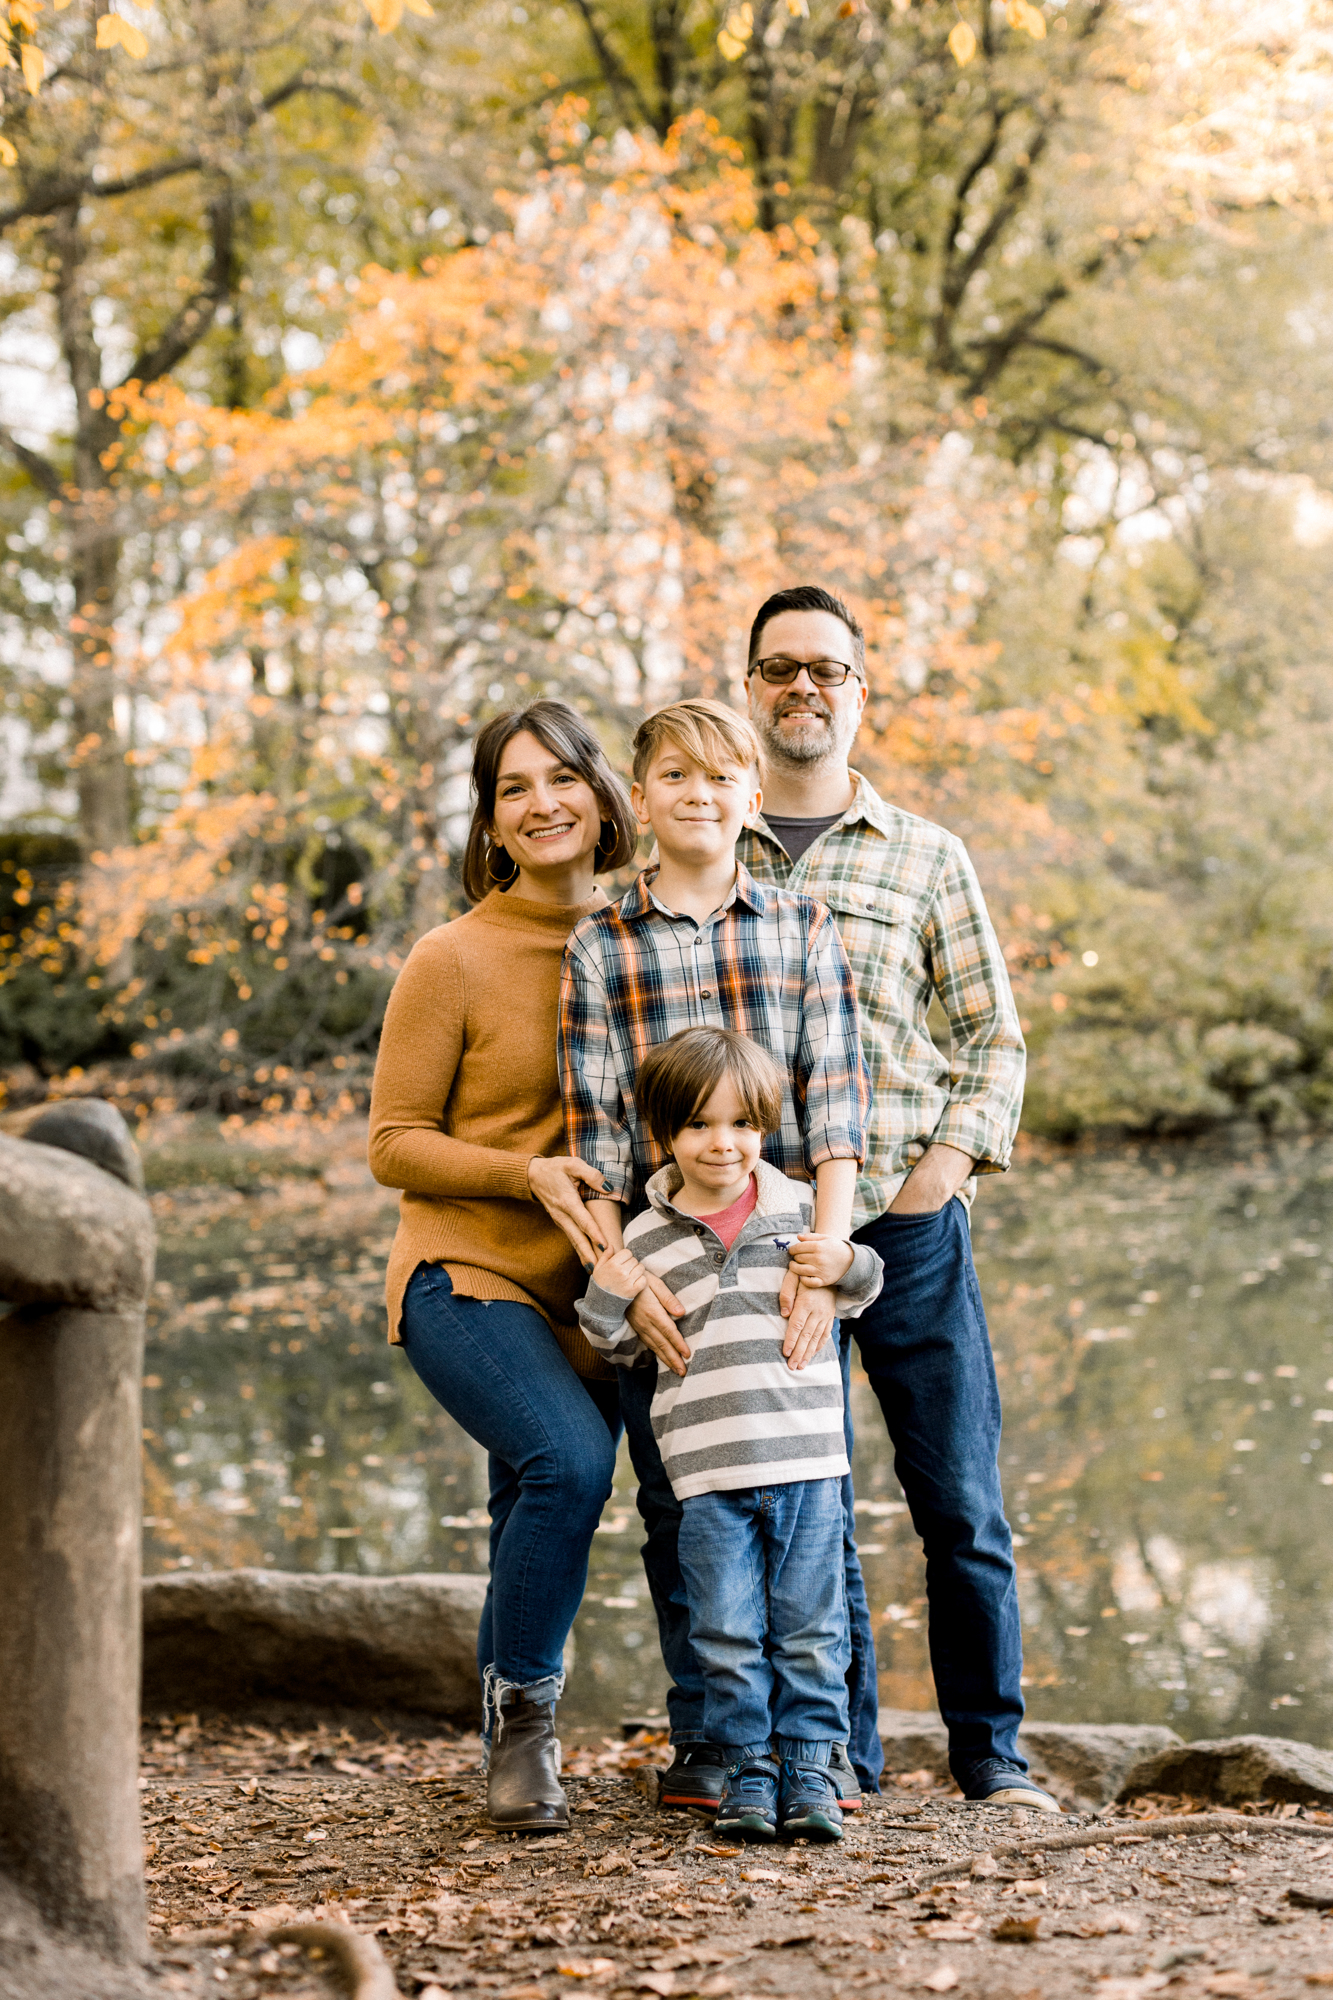 Cheerful Central Park Family Photos in New York